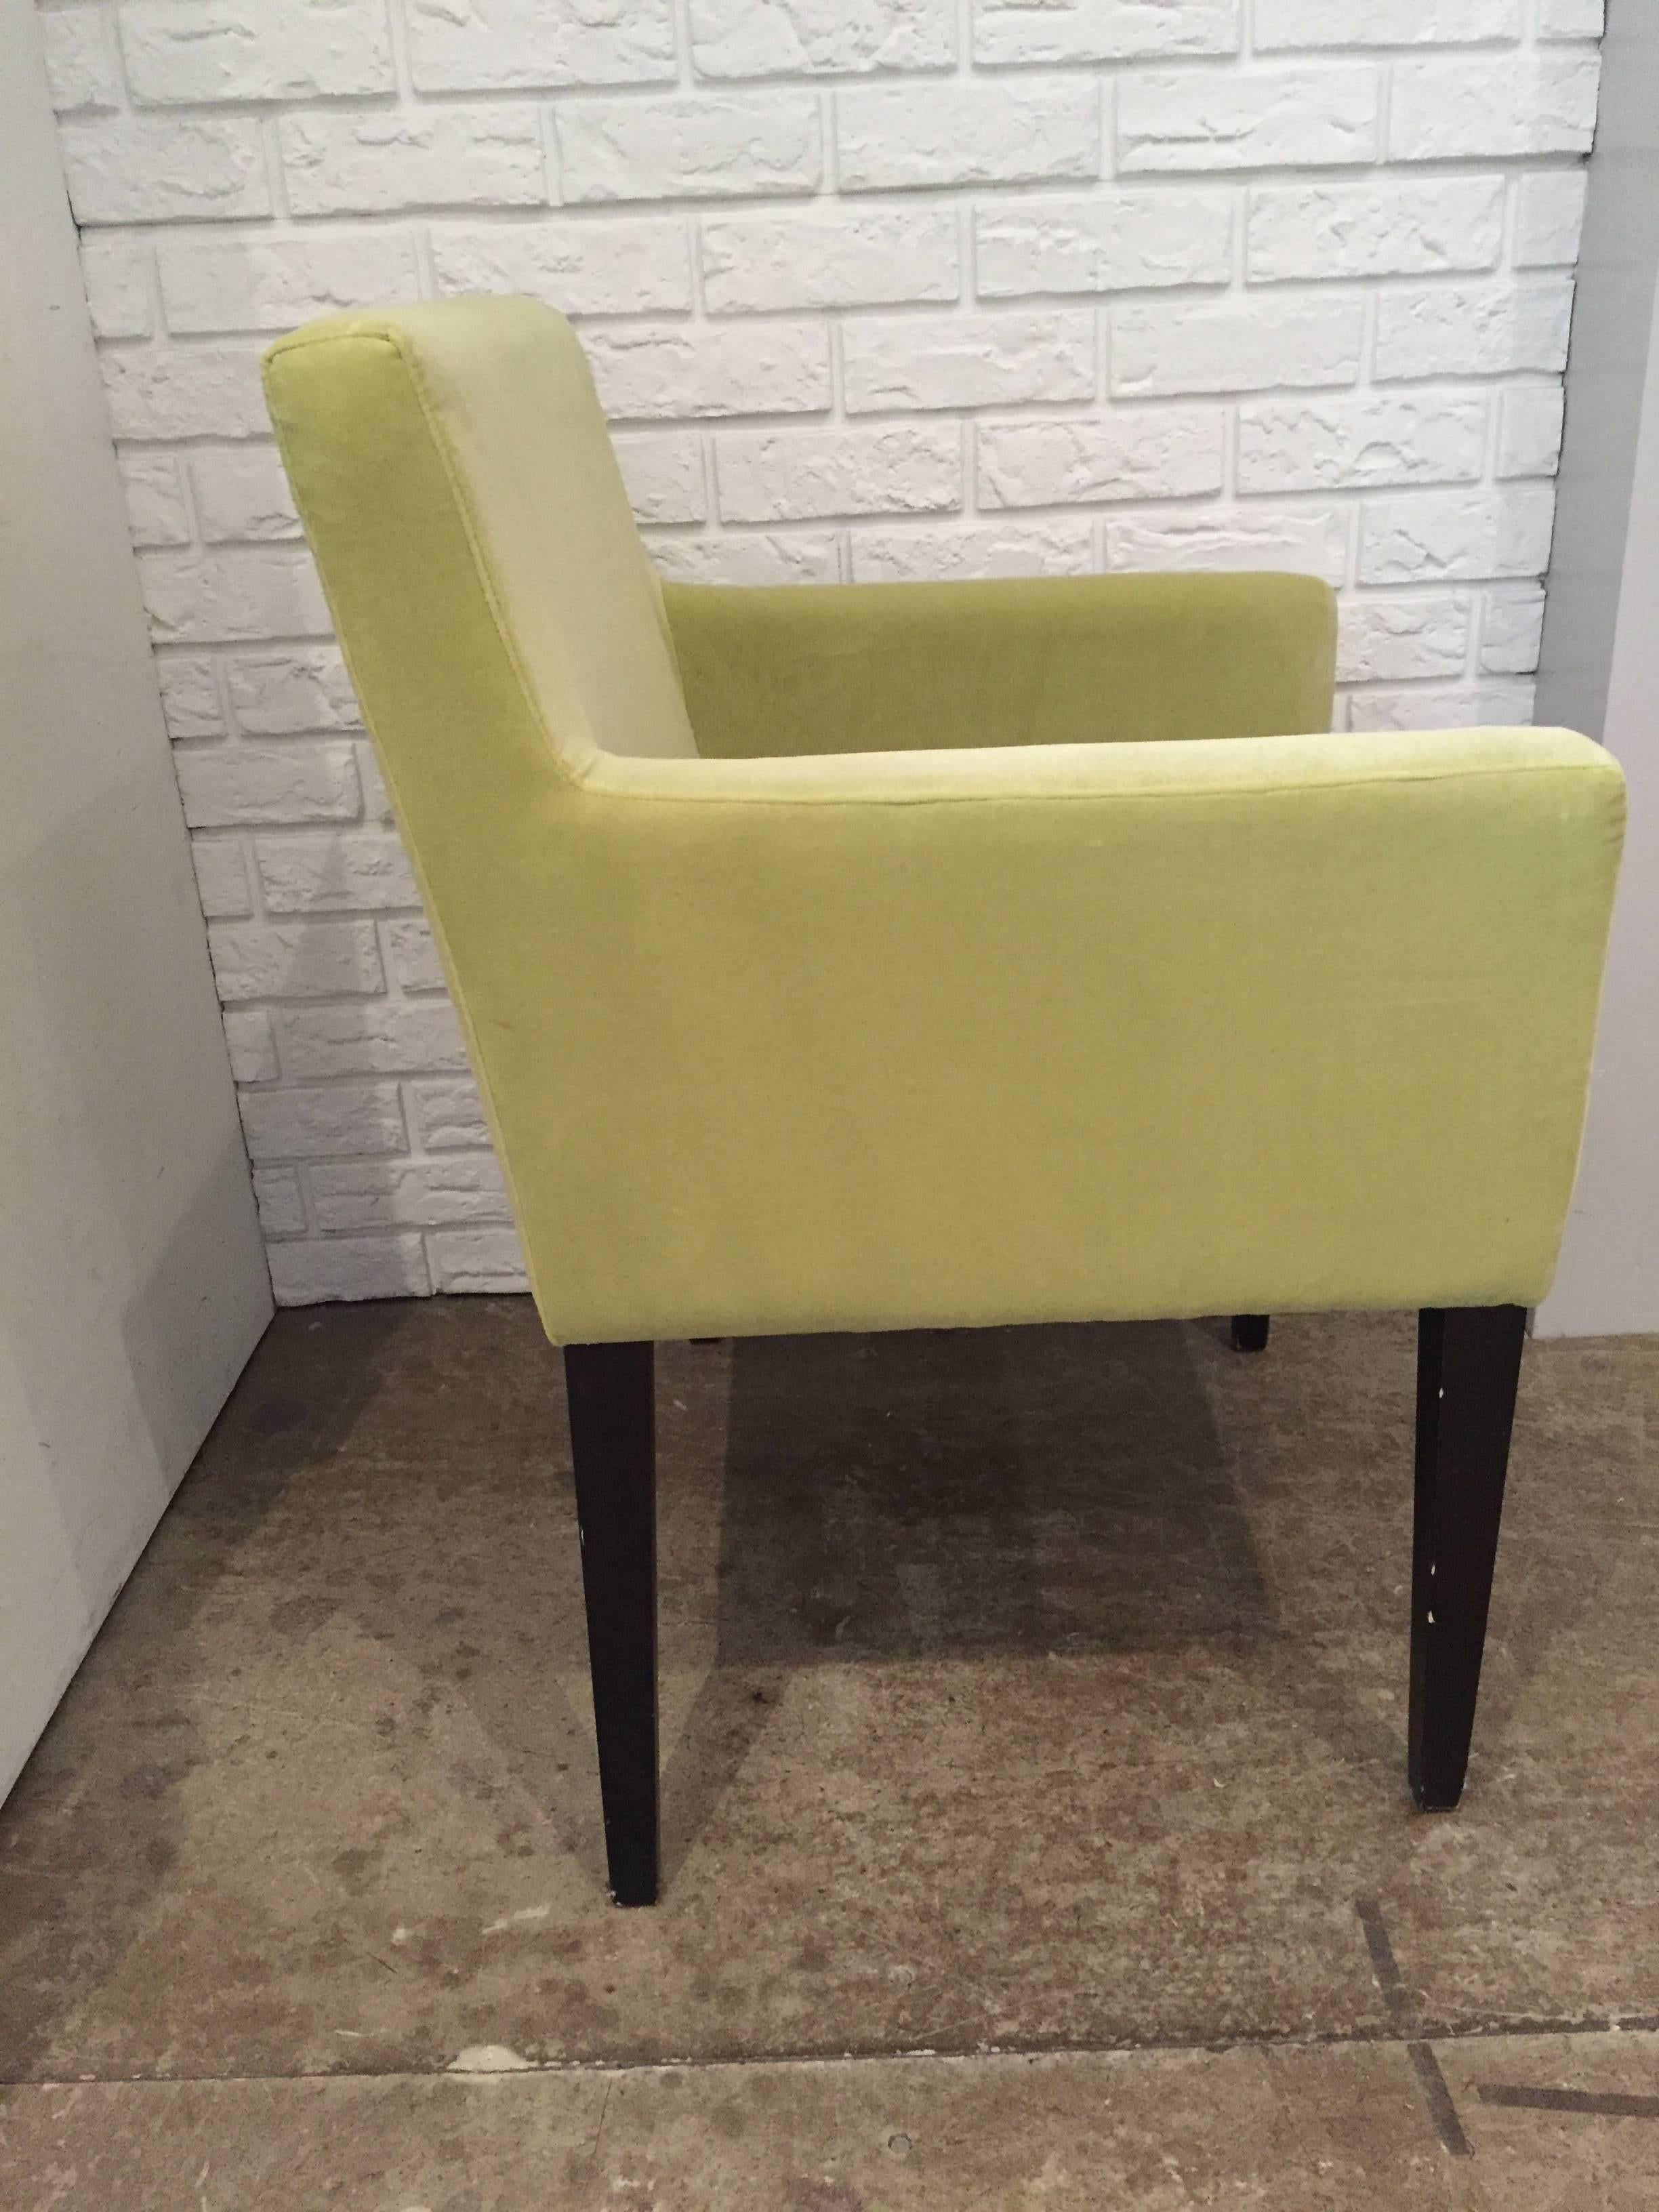 Pair of modern Dining Arm Chairs with slender wood legs. Recently reupholstered in a citrus lime Rogers and Goffigon velvet.  The chairs are versatile enough to work as occasional seating in the a Living Room or Library as well as serve as Host/ess